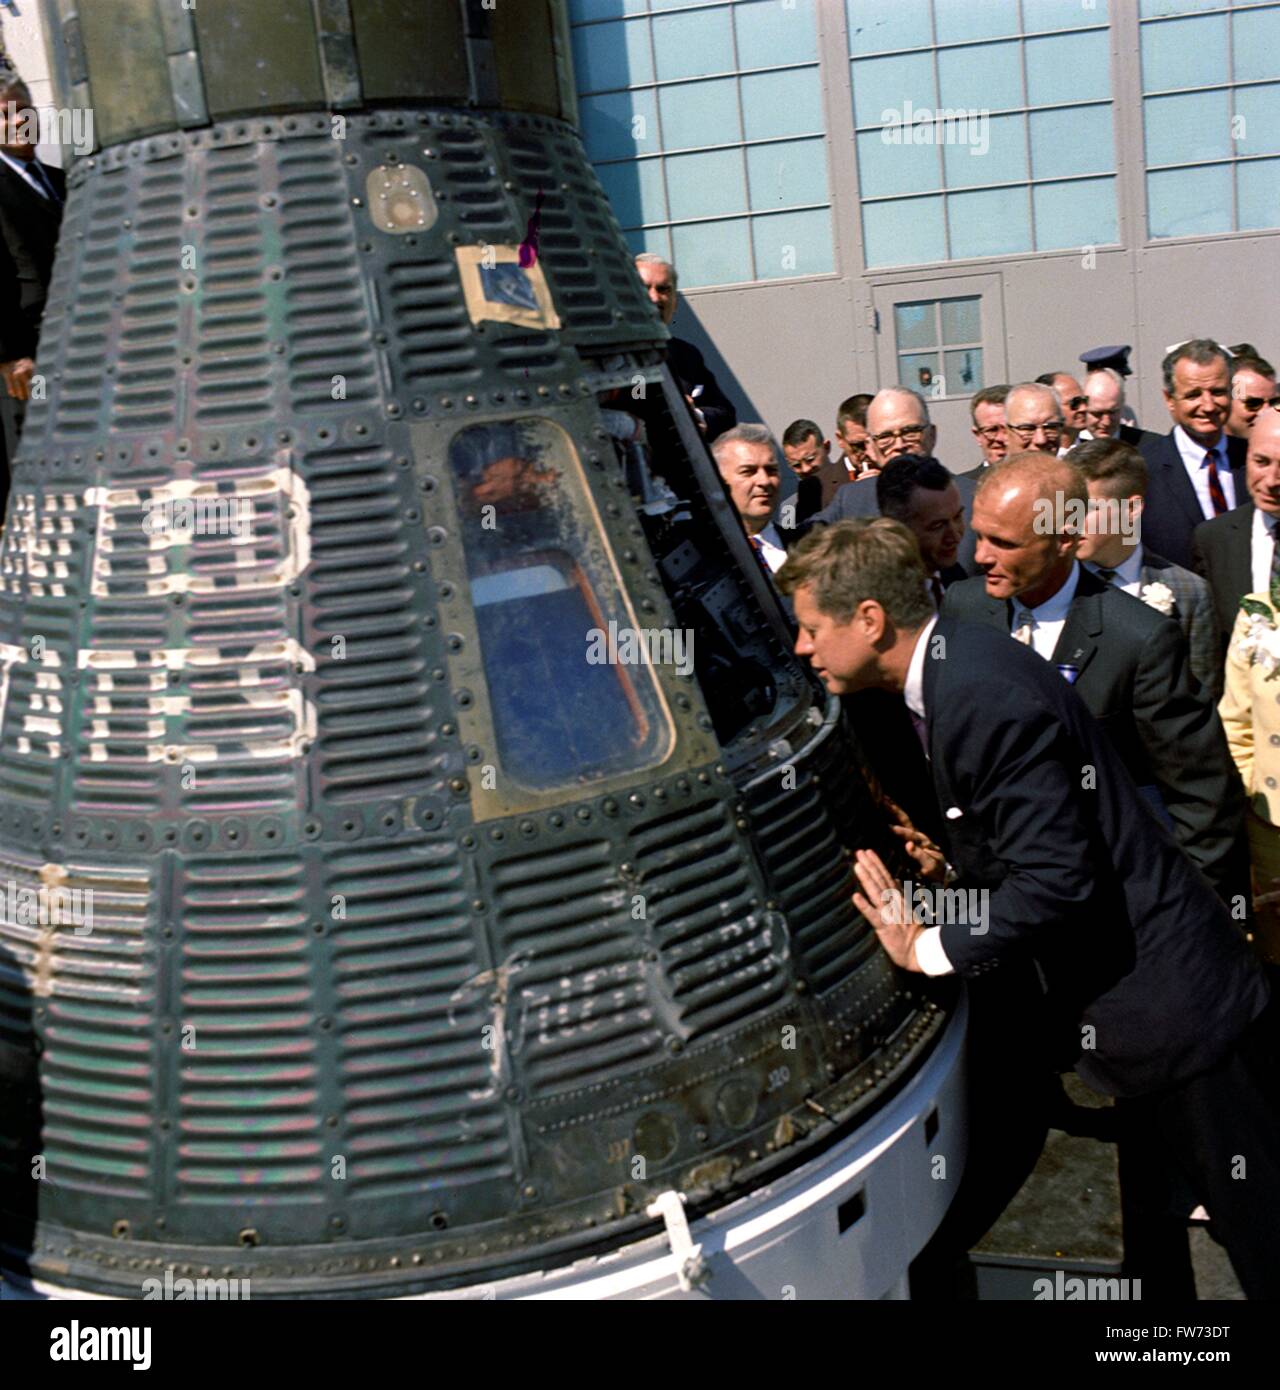 U.S. President John F. Kennedy and Astronaut John Glenn look into the Mercury Friendship 7 space capsule that carried Glenn into space at the Cape Canaveral Air Force Base February 23, 1962 in Cocoa Beach, Florida. Glenn was awarded Distinguished Service Medal by the President following his historic flight. Those looking on include: Special Assistant to the President Lawrence Larry O'Brien; Senator George Smathers of Florida; Director of the Manned Spacecraft Center Dr. Robert Gilruth.  Please credit 'Cecil Stoughton, White House/John F. Kennedy Presidential Library and Museum, Boston' Stock Photo